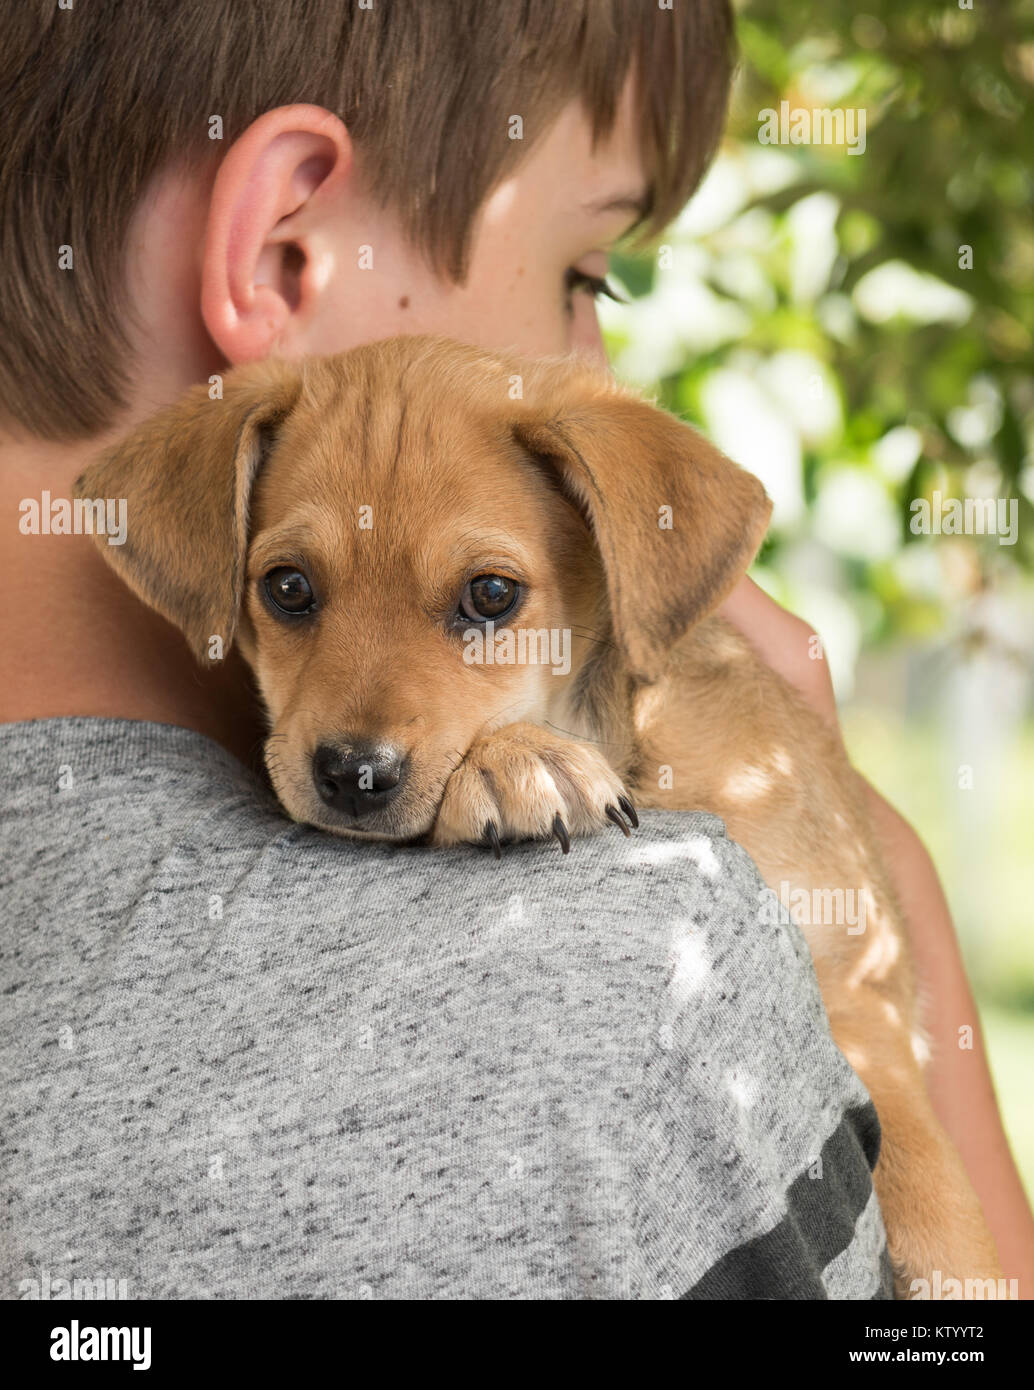 Tiny Little Puppy Being Held in Arms Stock Photo